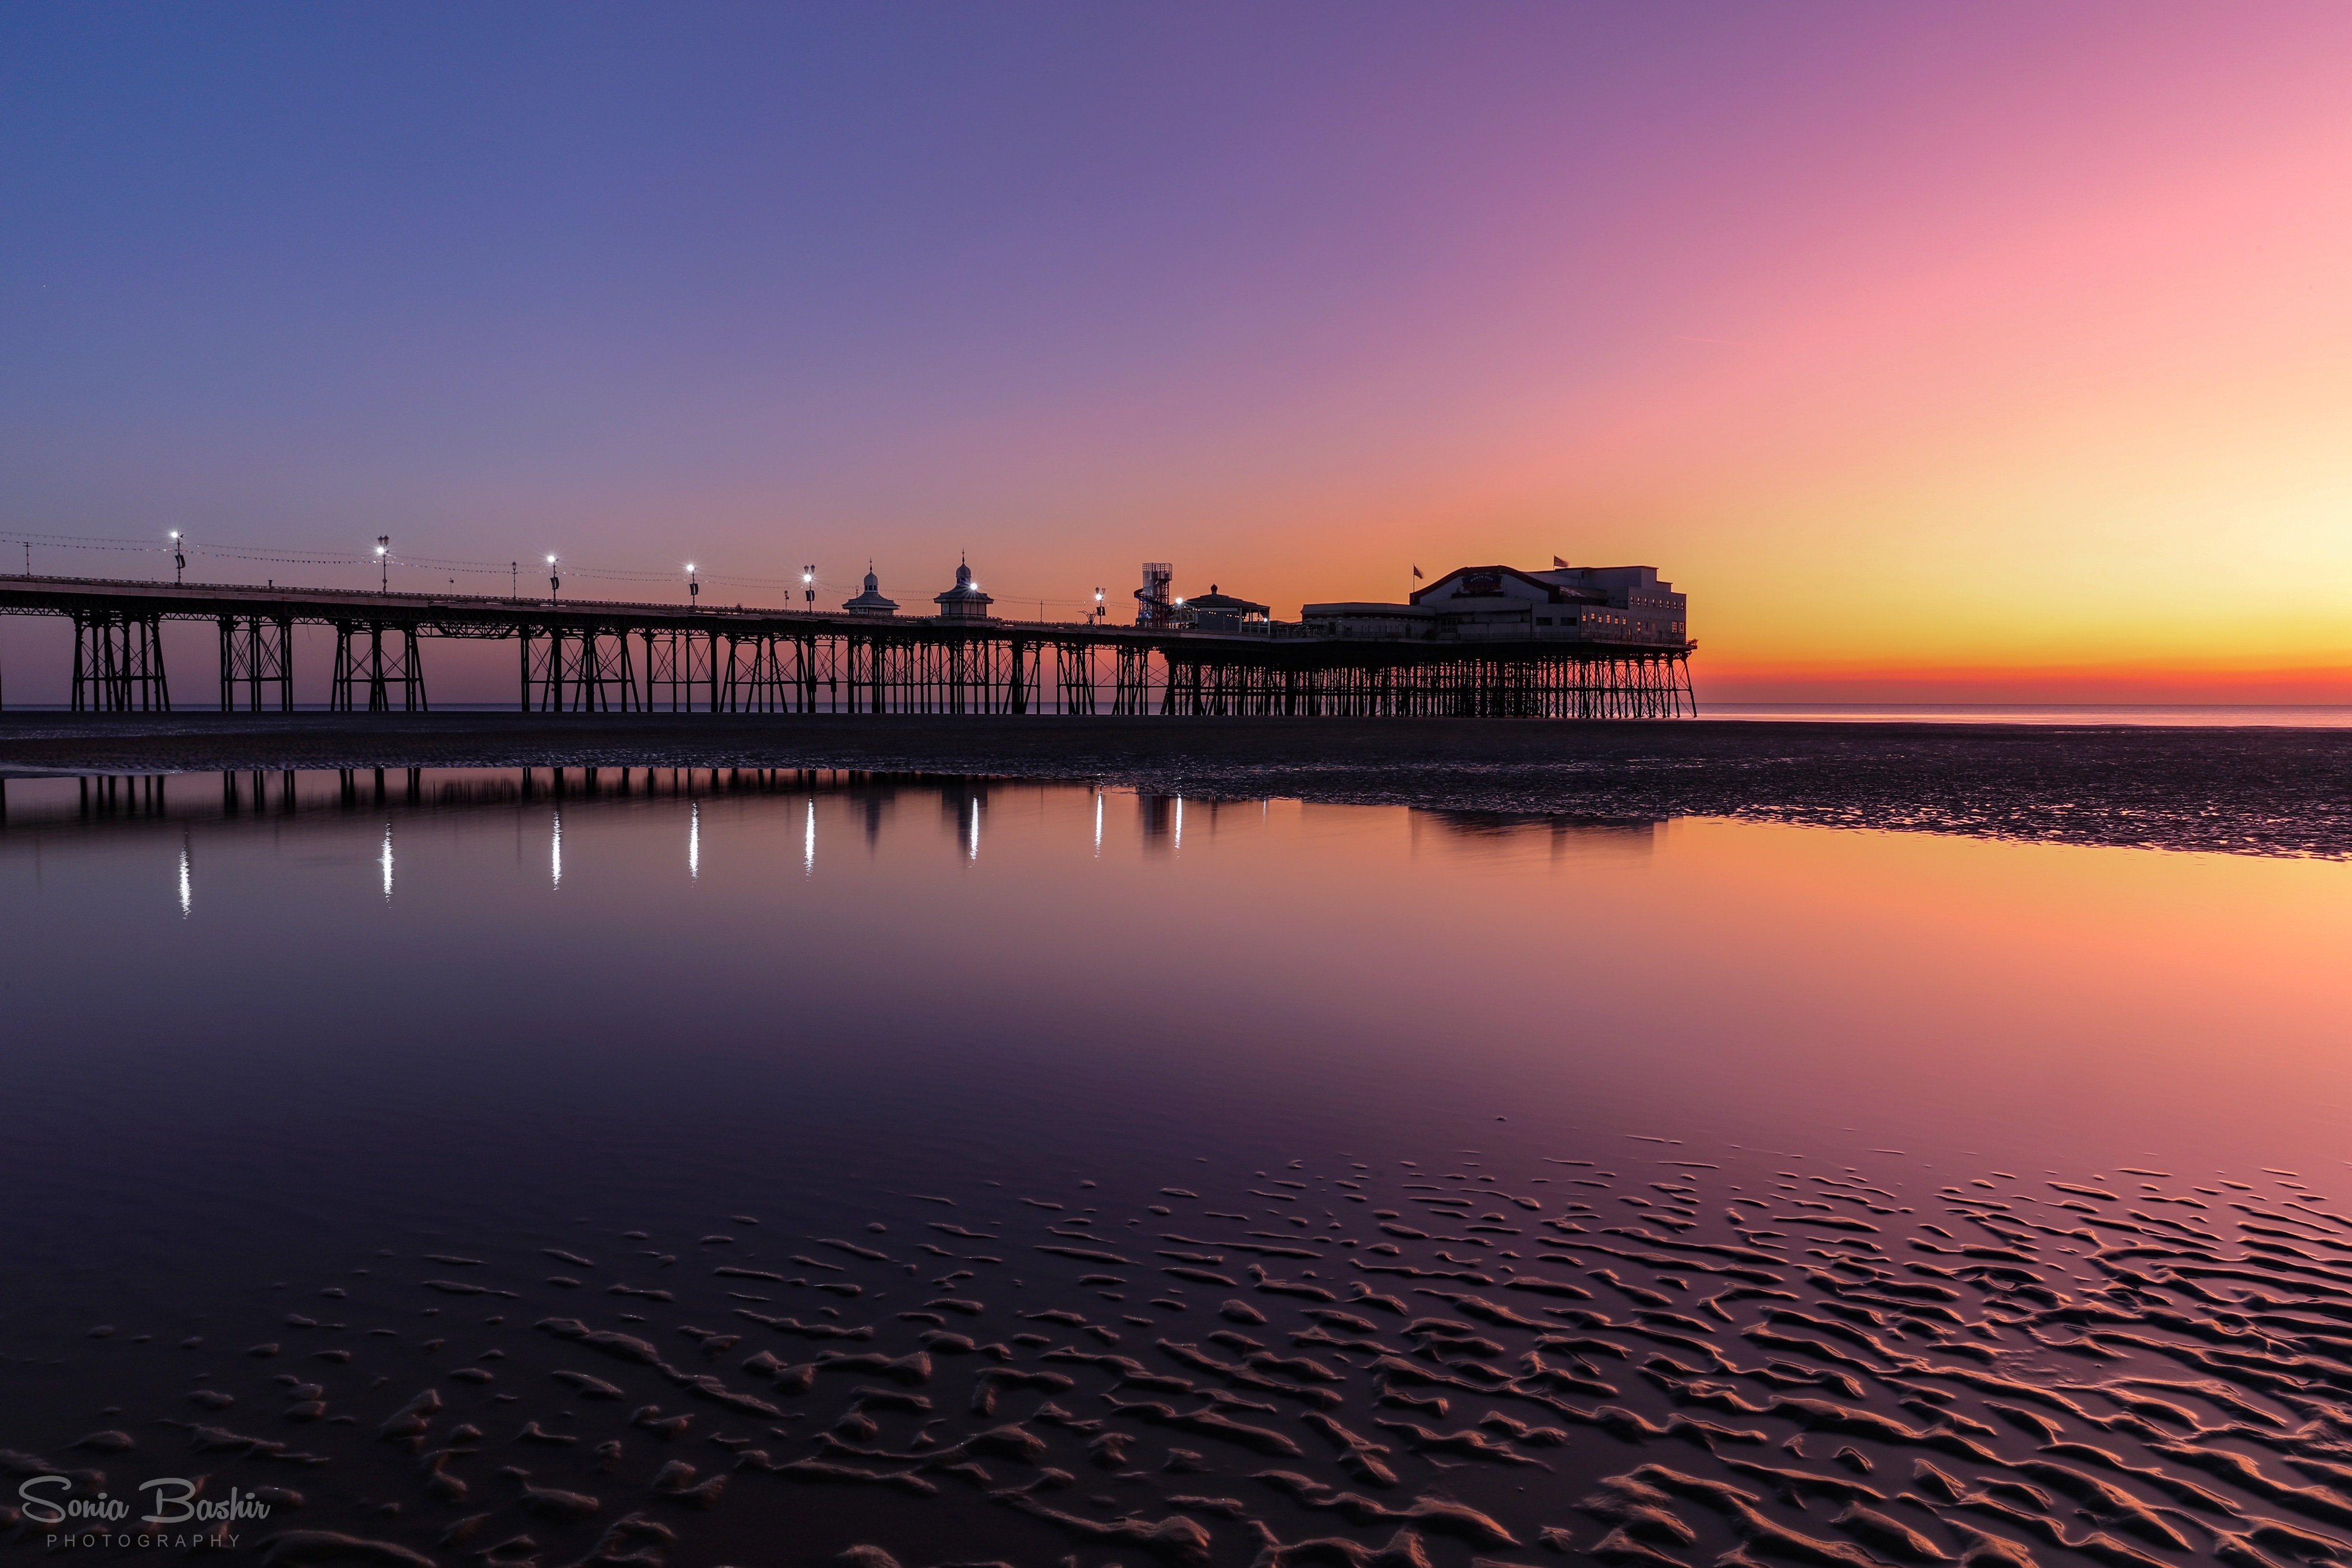 1st Place North Pier Sunset, Blackpool by Sonia Bashir @SoniaBashir_